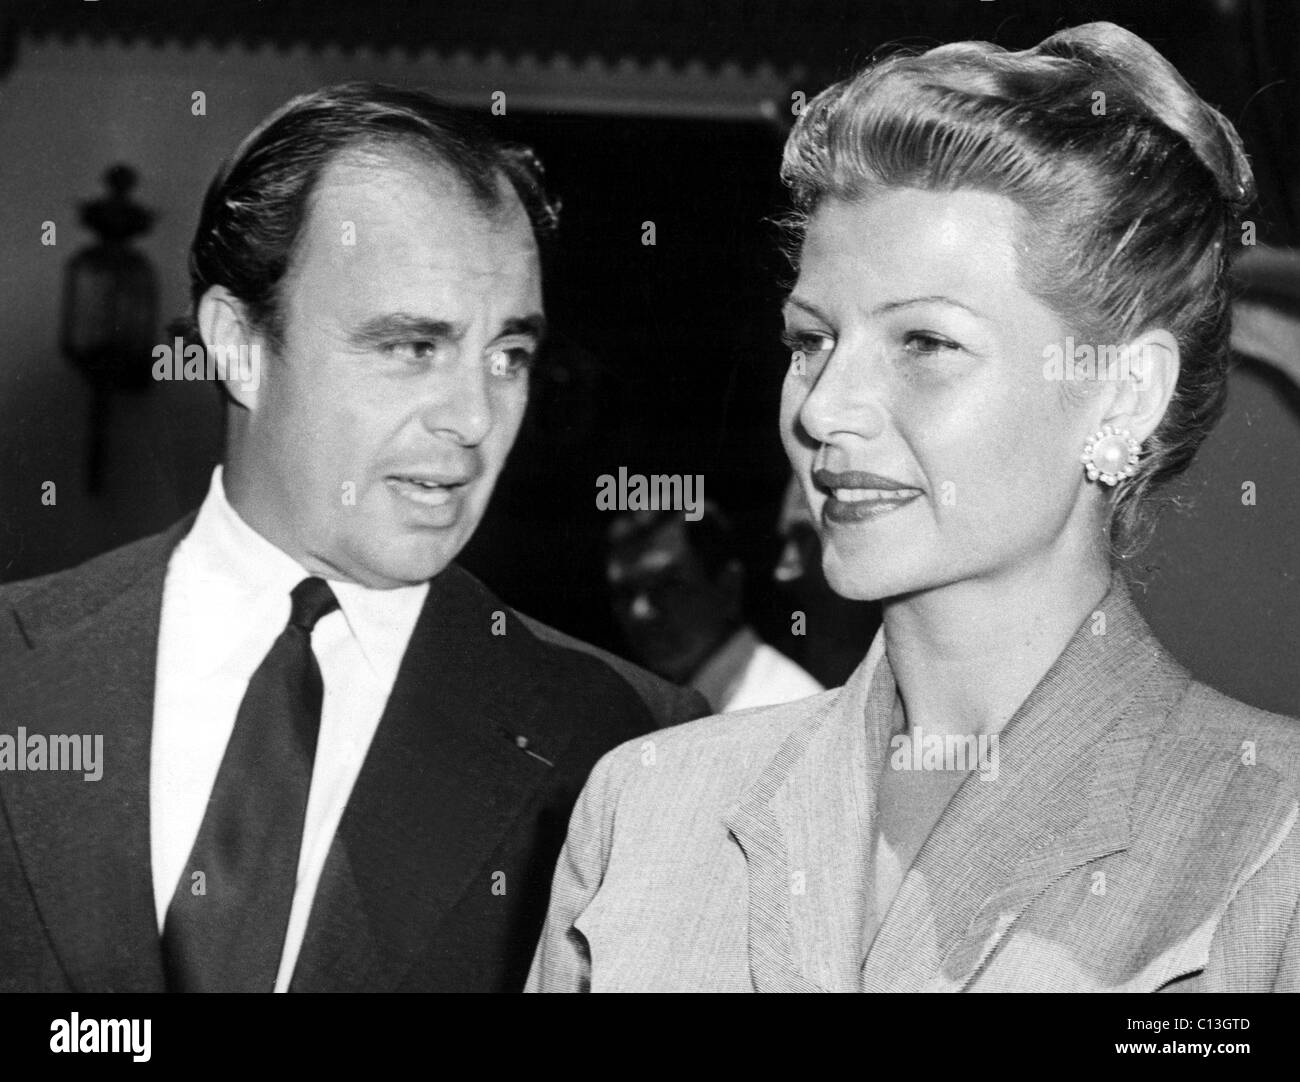 PRINCE ALY KHAN with spouse RITA HAYWORTH, 1952 Stock Photo